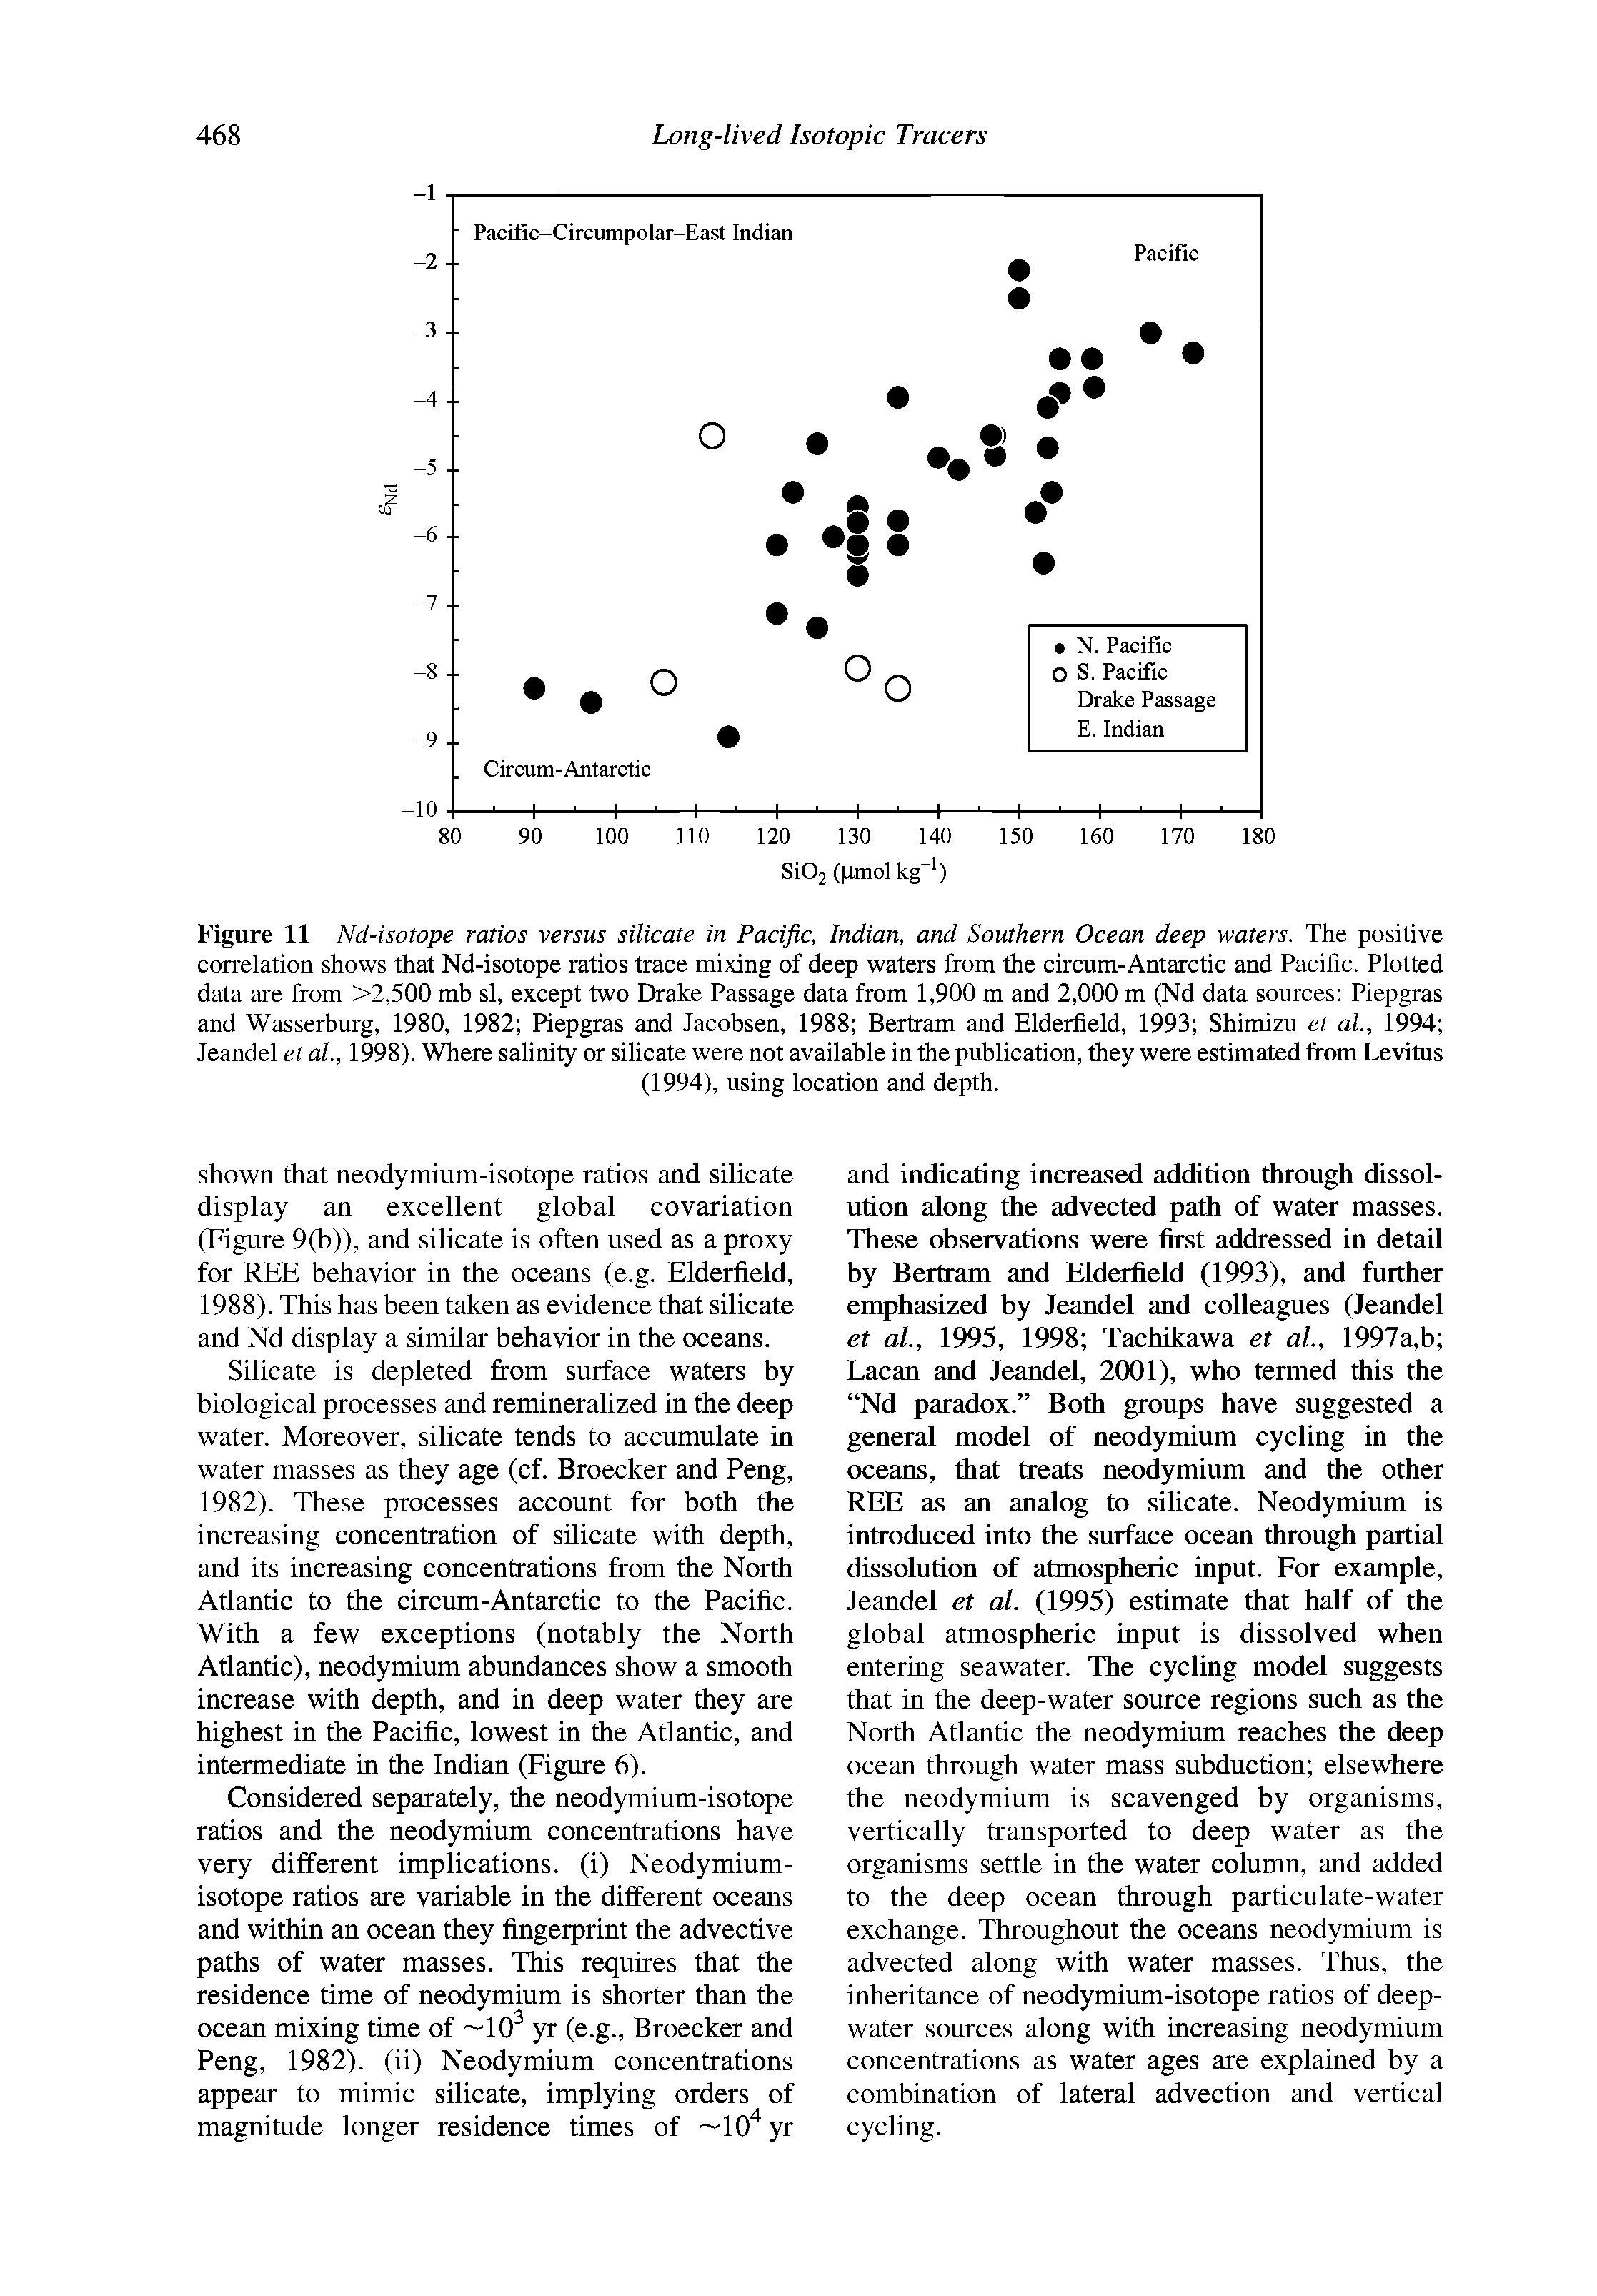 Figure 11 Nd-isotope ratios versus silicate in Pacific, Indian, and Southern Ocean deep waters. The positive correlation shows that Nd-isotope ratios trace mixing of deep waters from the circum-Antarctic and Pacific. Plotted data are from >2,500 mb si, except two Drake Passage data from 1,900 m and 2,000 m (Nd data sources Piepgras and Wasserburg, 1980, 1982 Piepgras and Jacobsen, 1988 Bertram and Elderfield, 1993 Shimizu et al., 1994 Jeandel et al., 1998). Where salinity or silicate were not available in the publication, they were estimated from Levitus...